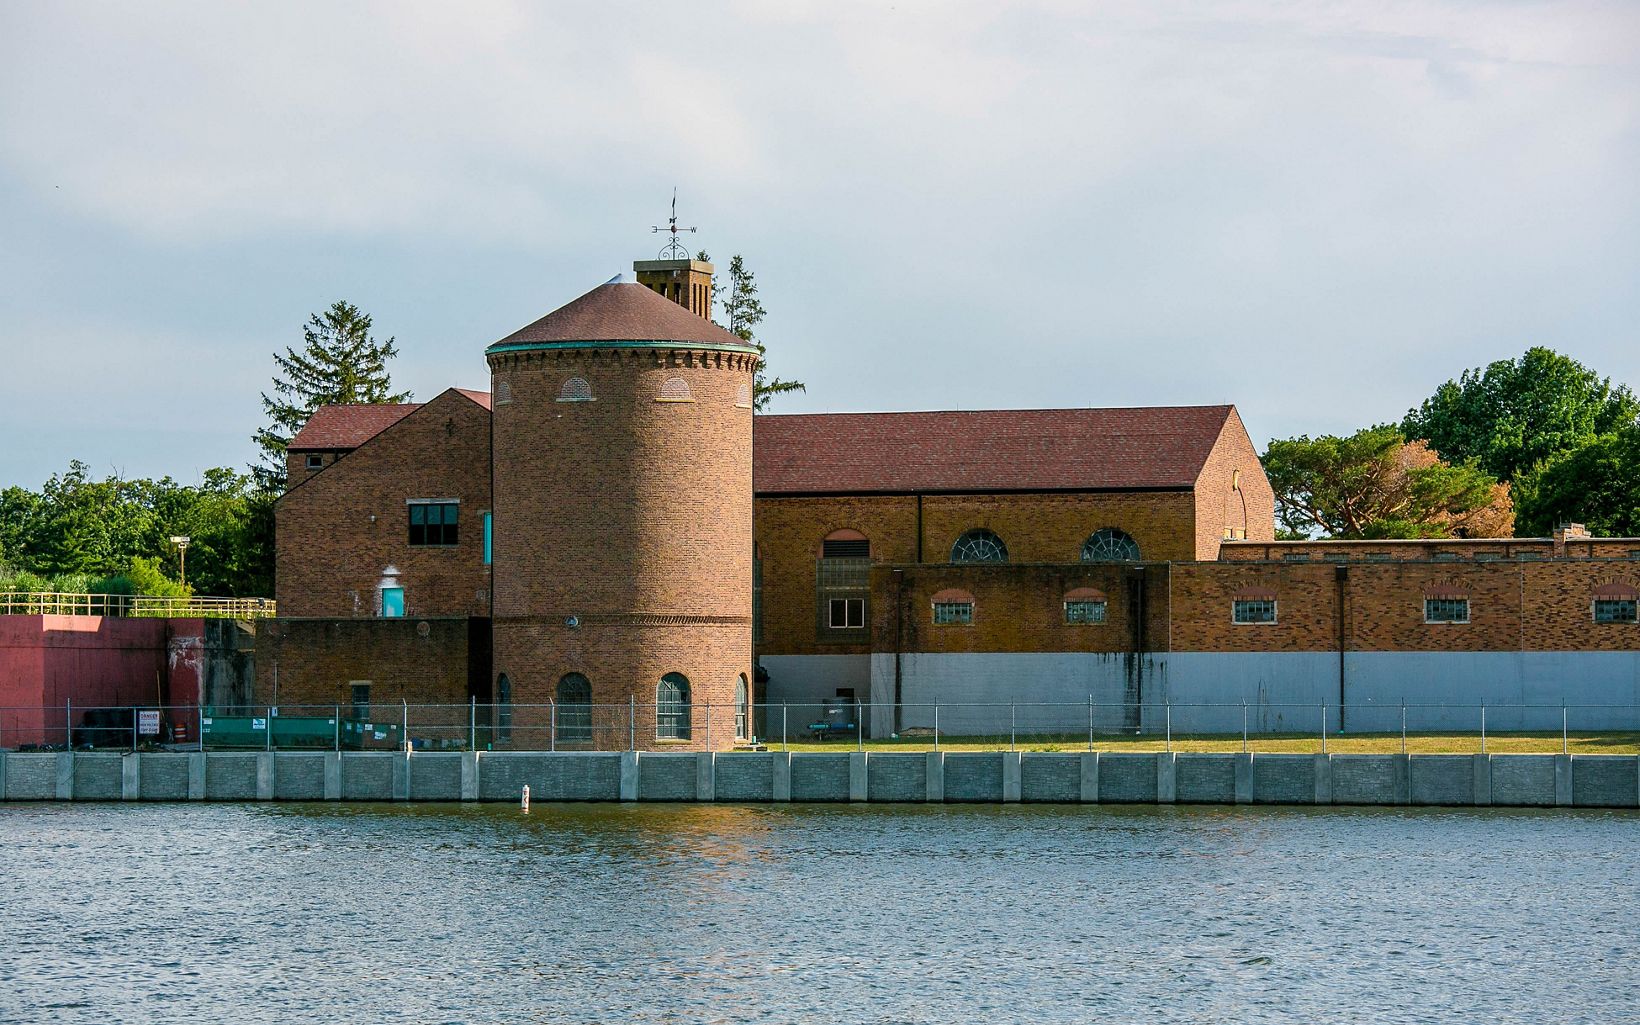 Lake Bloomington is a man-made lake used to supply water to residents of Bloomington, Illinois. Lake Bloomington was constructed in 1929 and has a Water Treatment Plant adjacent to it.